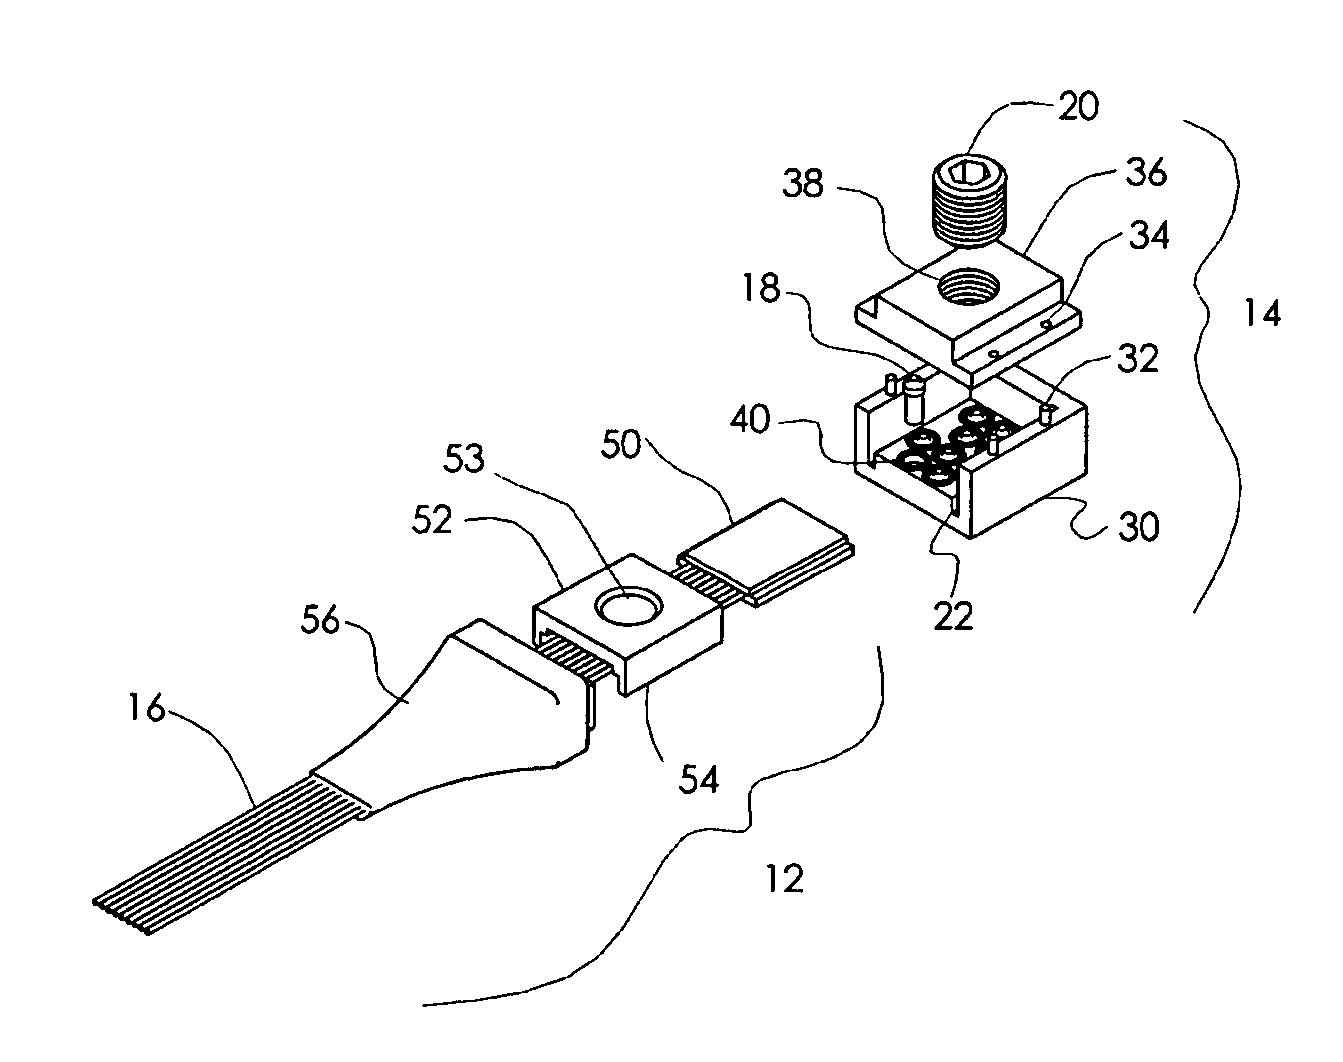 Implantable modular, multi-channel connector system for nerve signal sensing and electrical stimulation applications